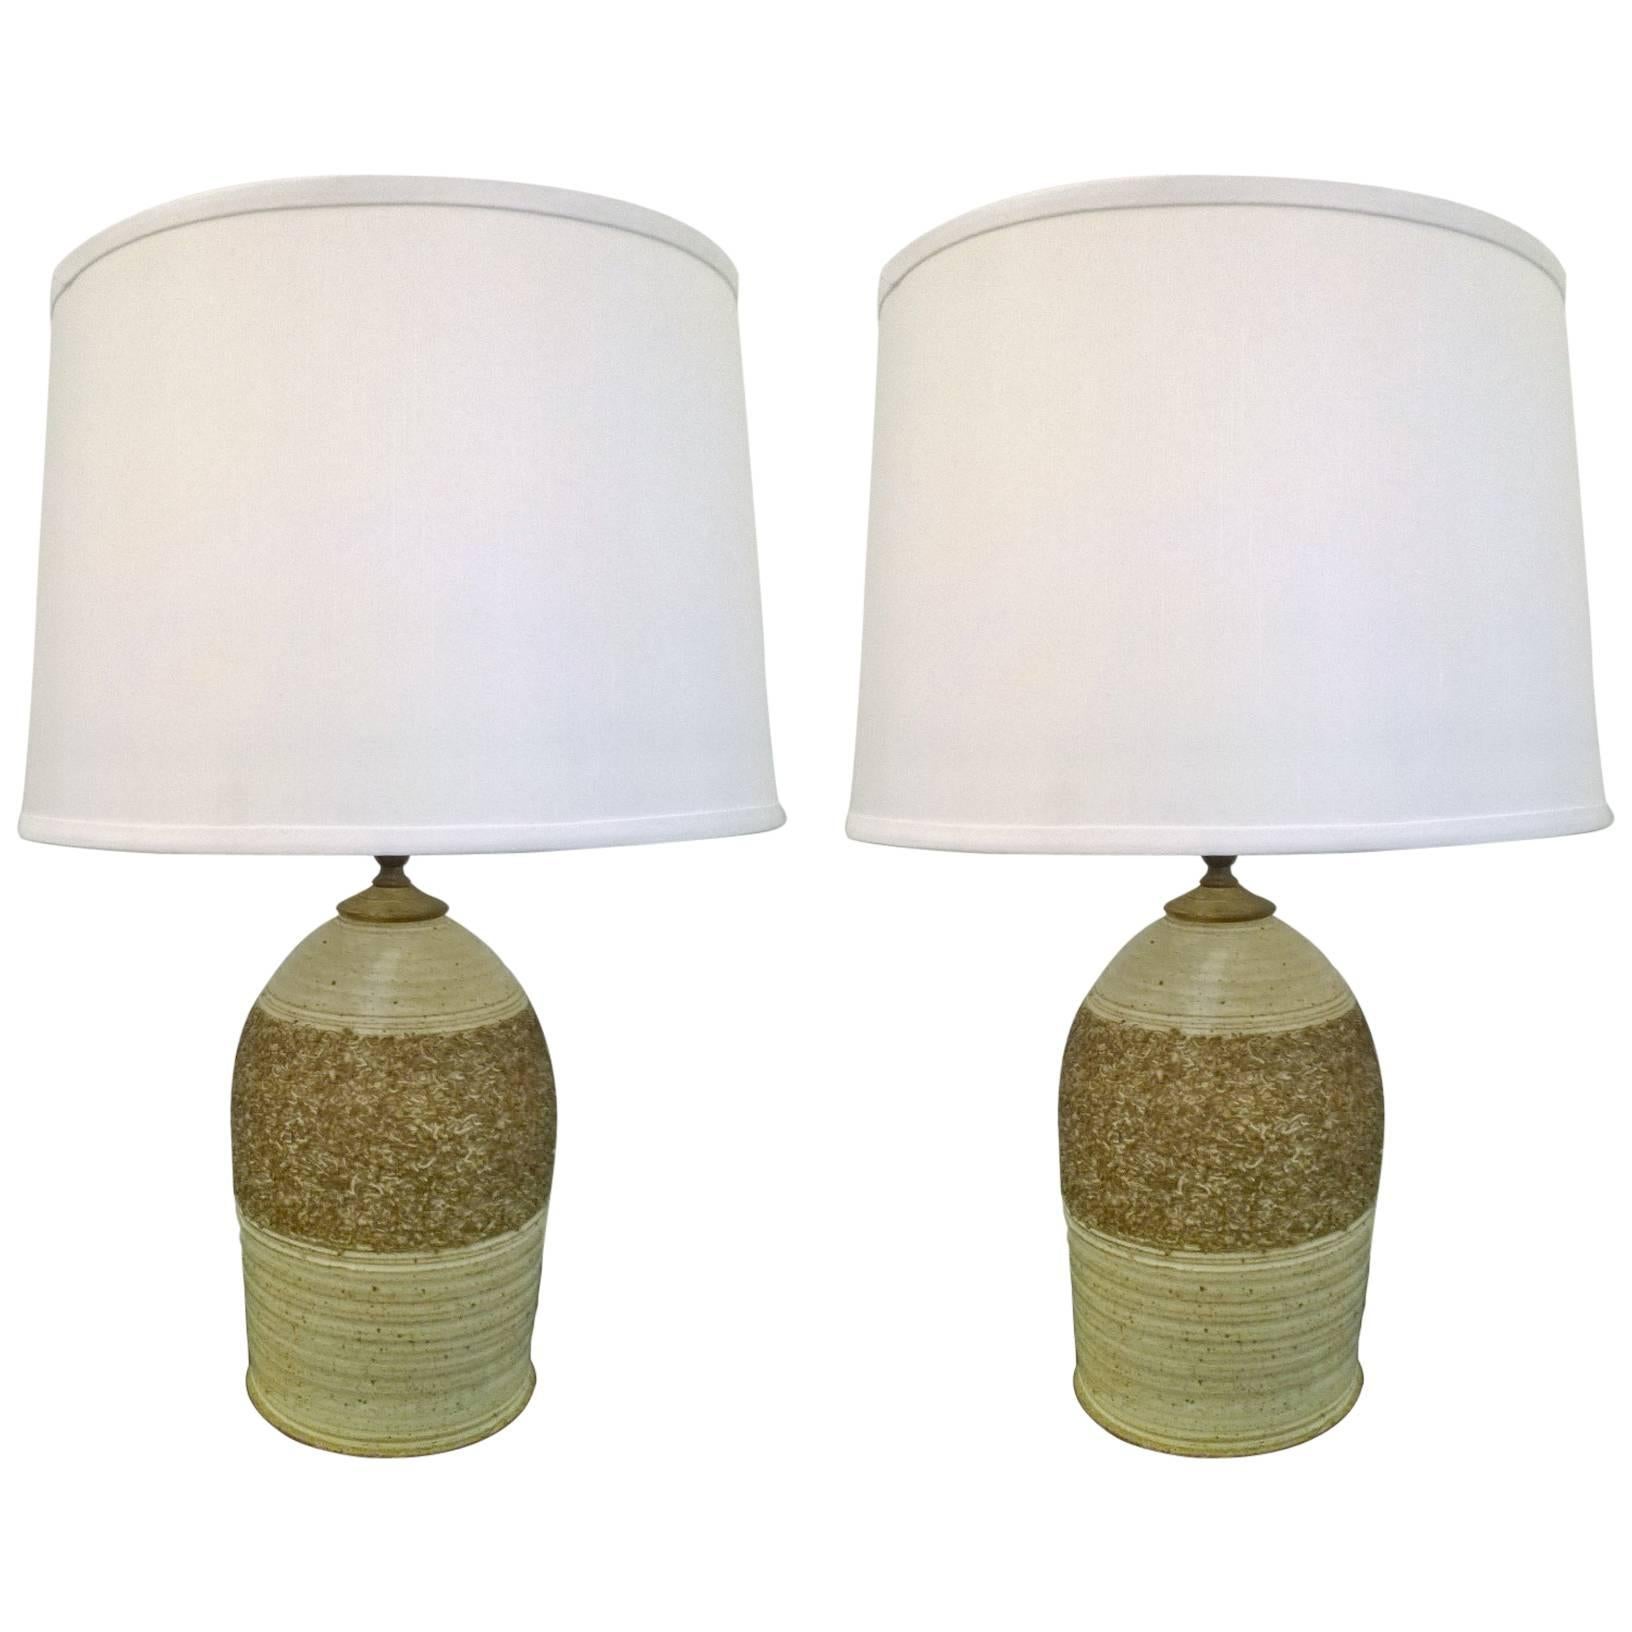 Pair of Art Pottery 1960s Stoneware Table Lamps